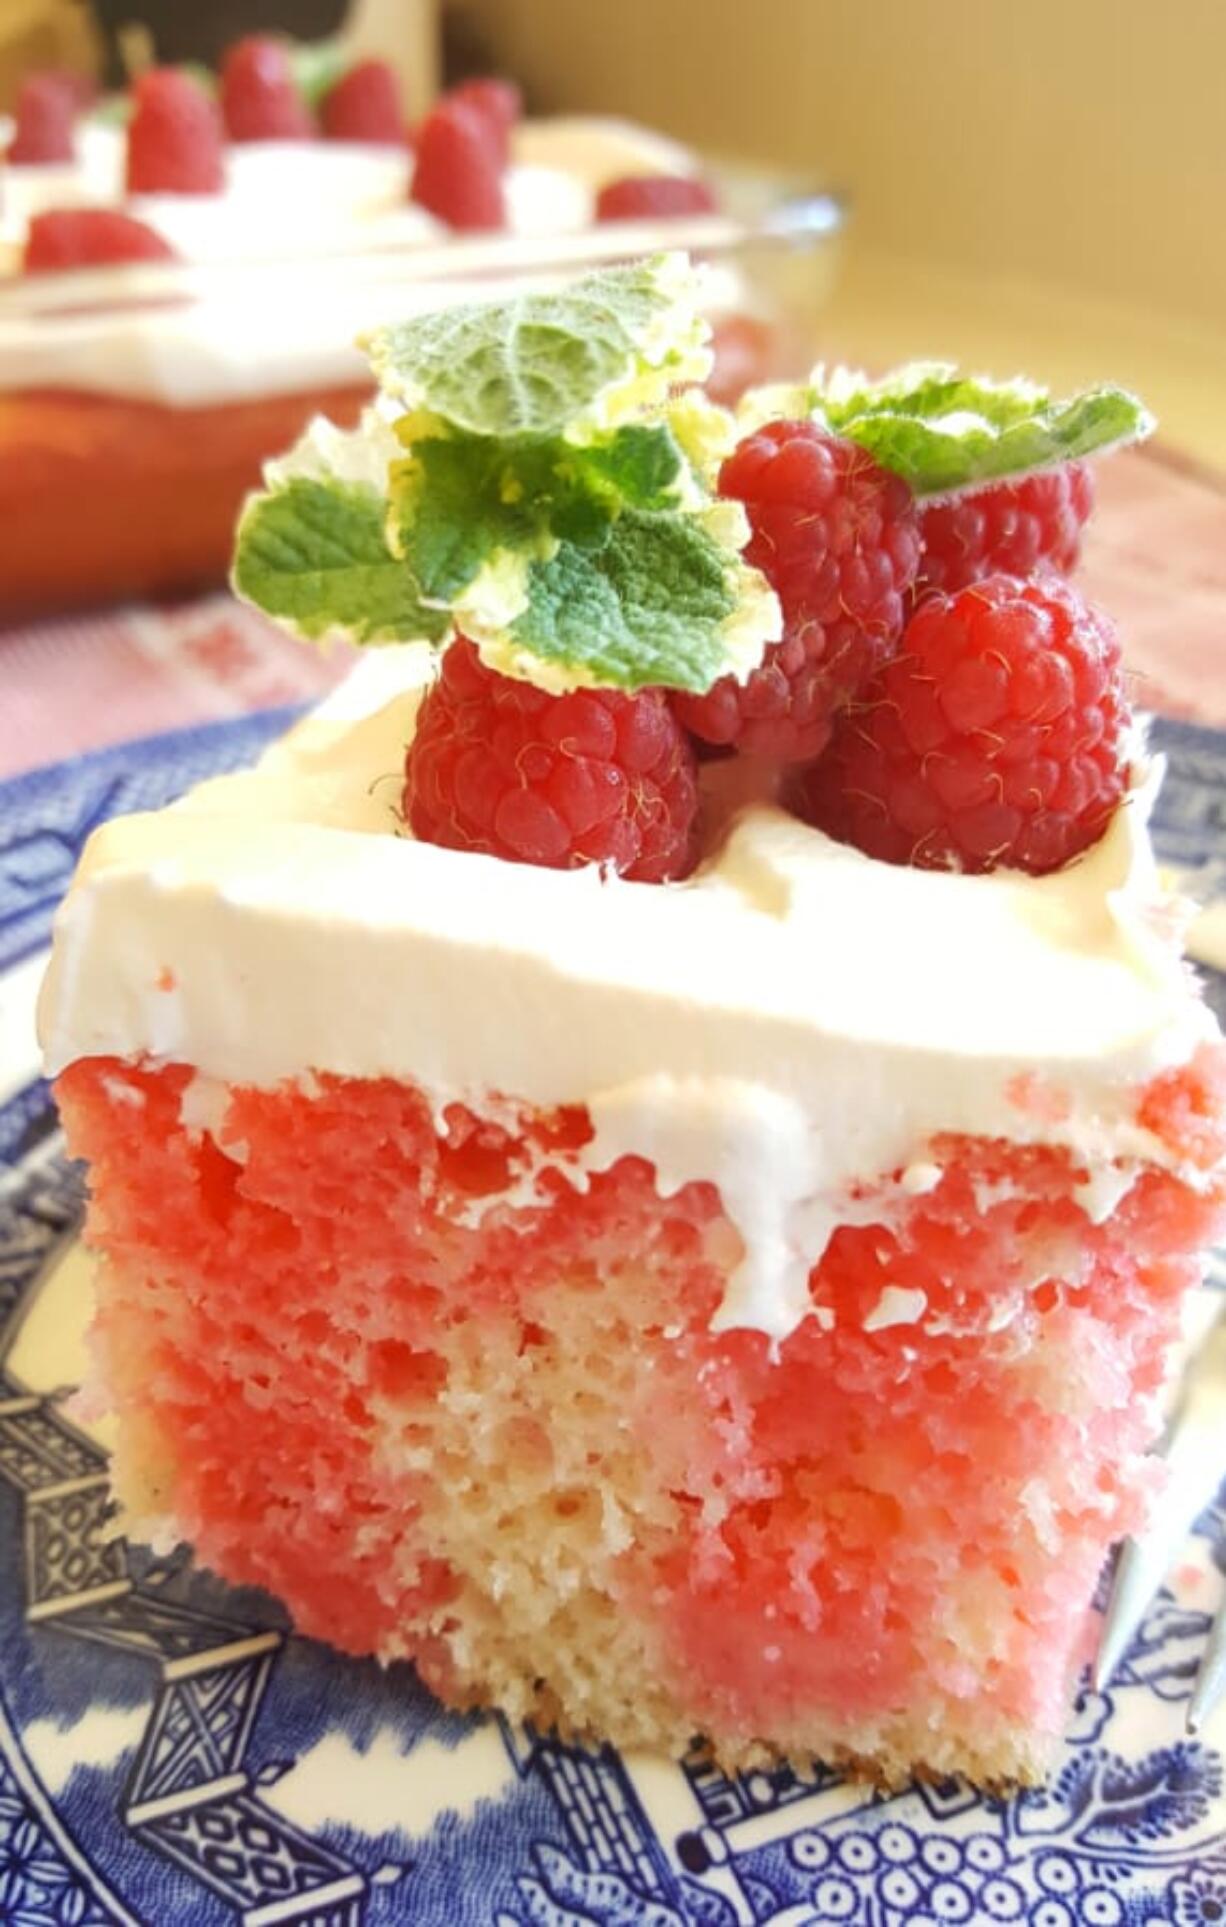 This raspberry poke cake has pockets of raspberry flavor made by poking holes in the cake while it&#039;s still warm and filling them with raspberry gelatin.